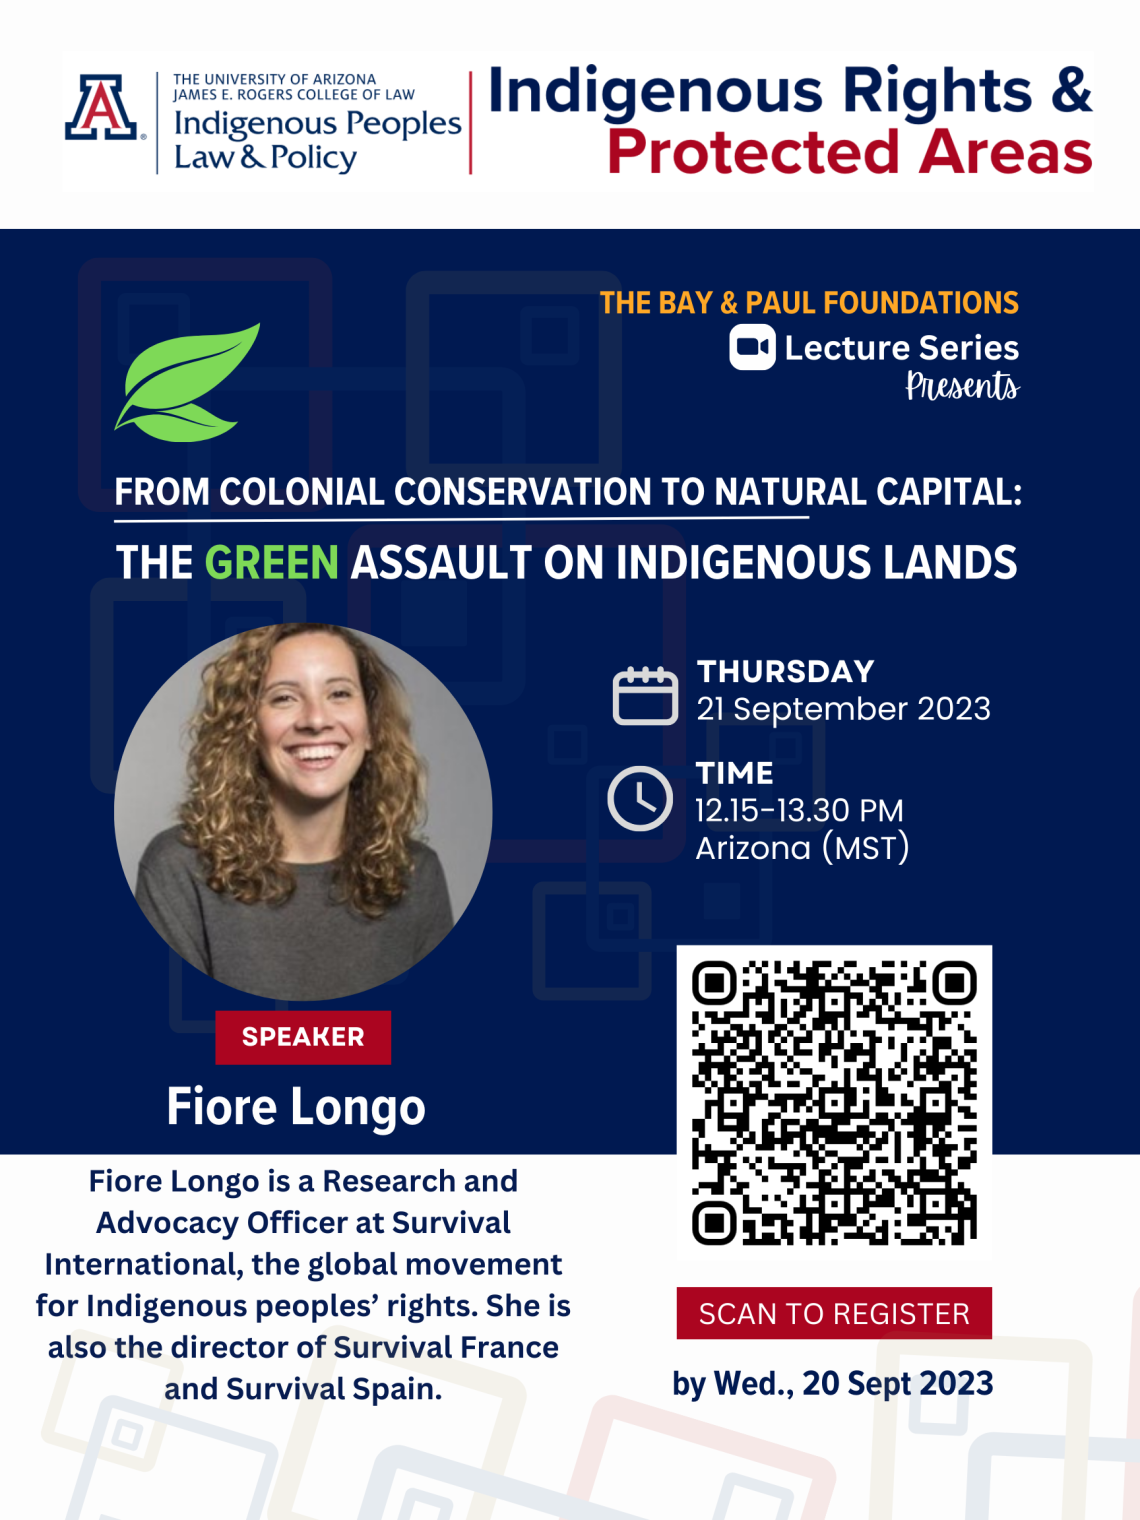 The Green Assault on Indigenous Lands